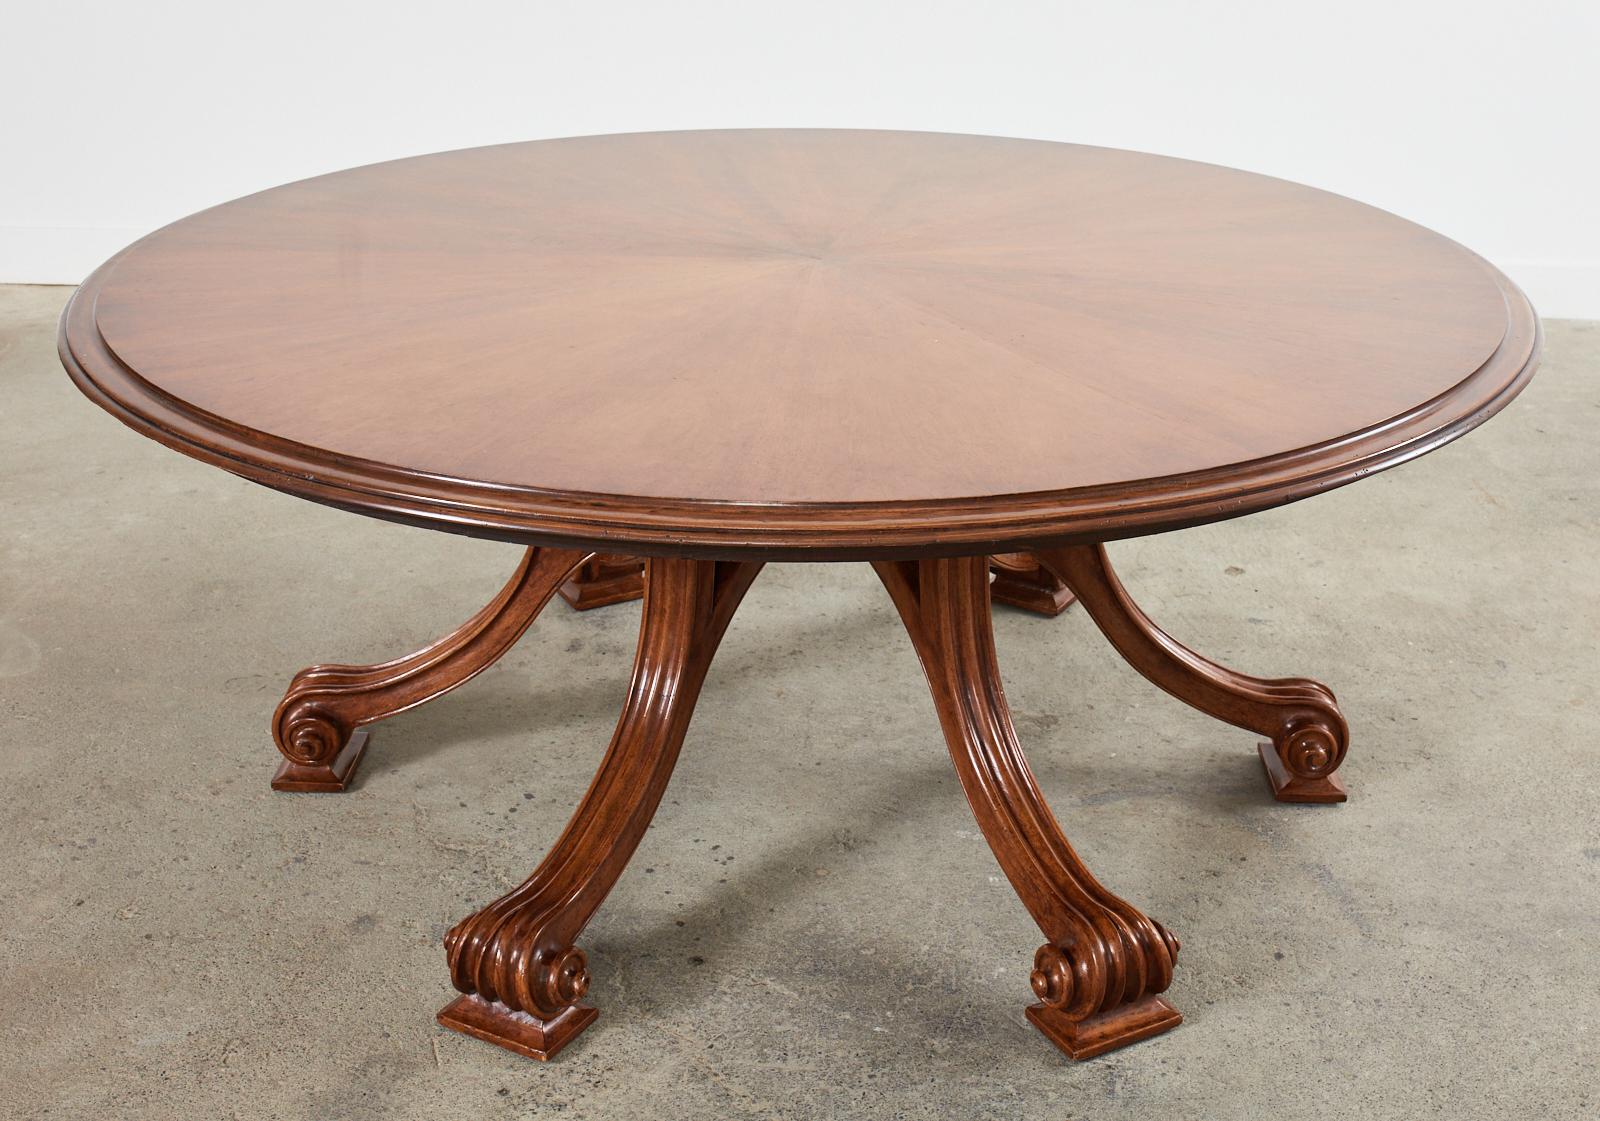 American Therien Studio Workshop Walnut Volute Dining Table with Leaves